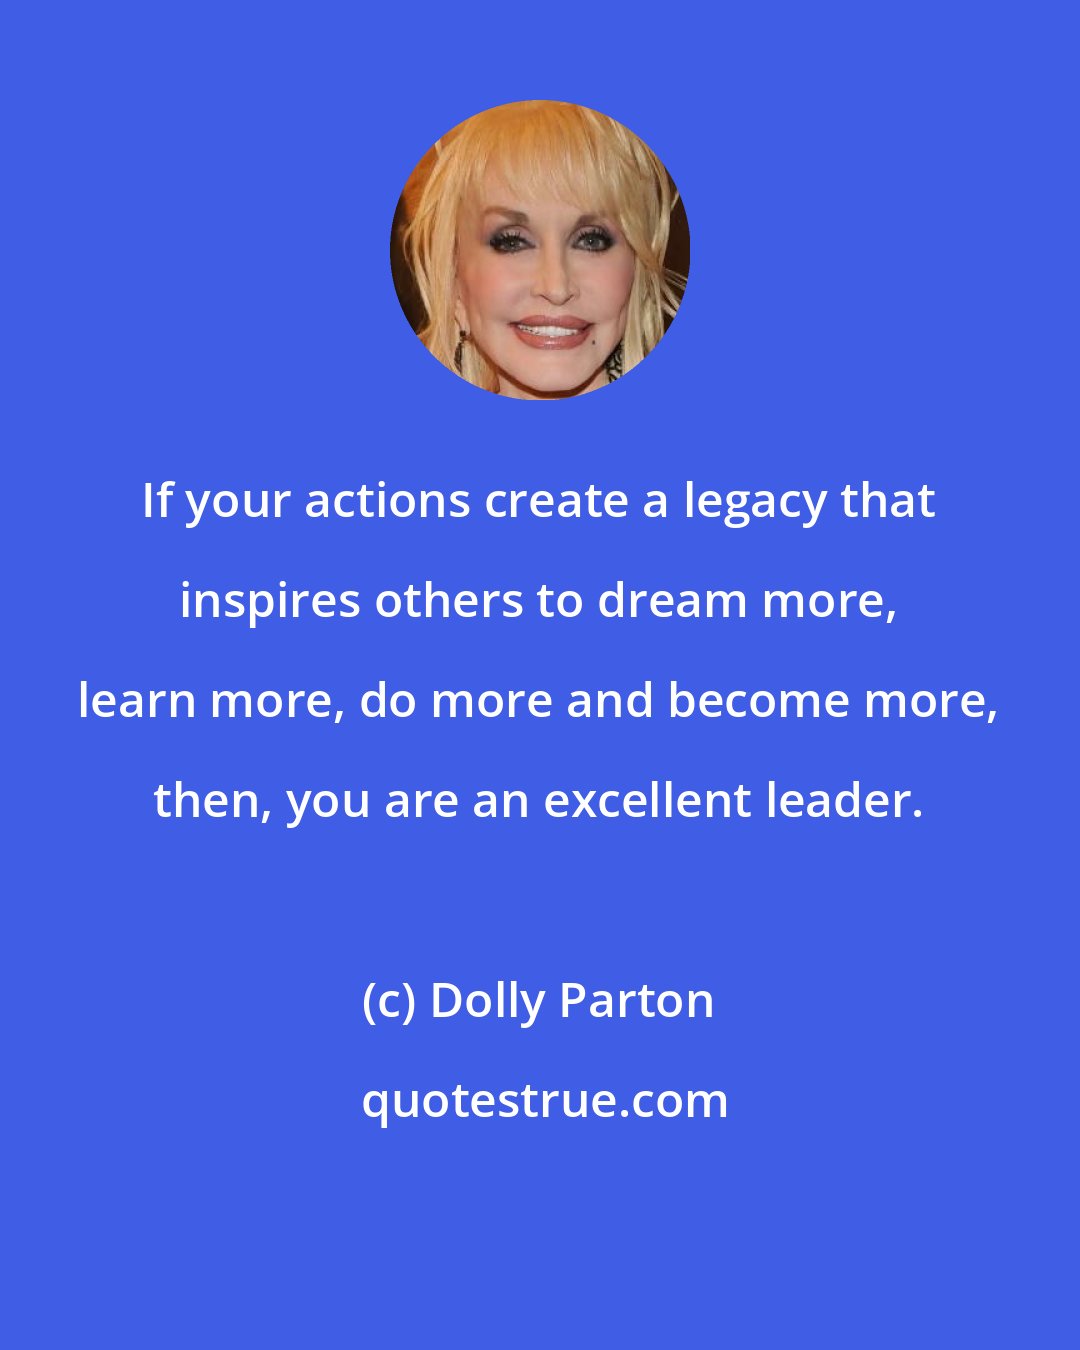 Dolly Parton: If your actions create a legacy that inspires others to dream more, learn more, do more and become more, then, you are an excellent leader.